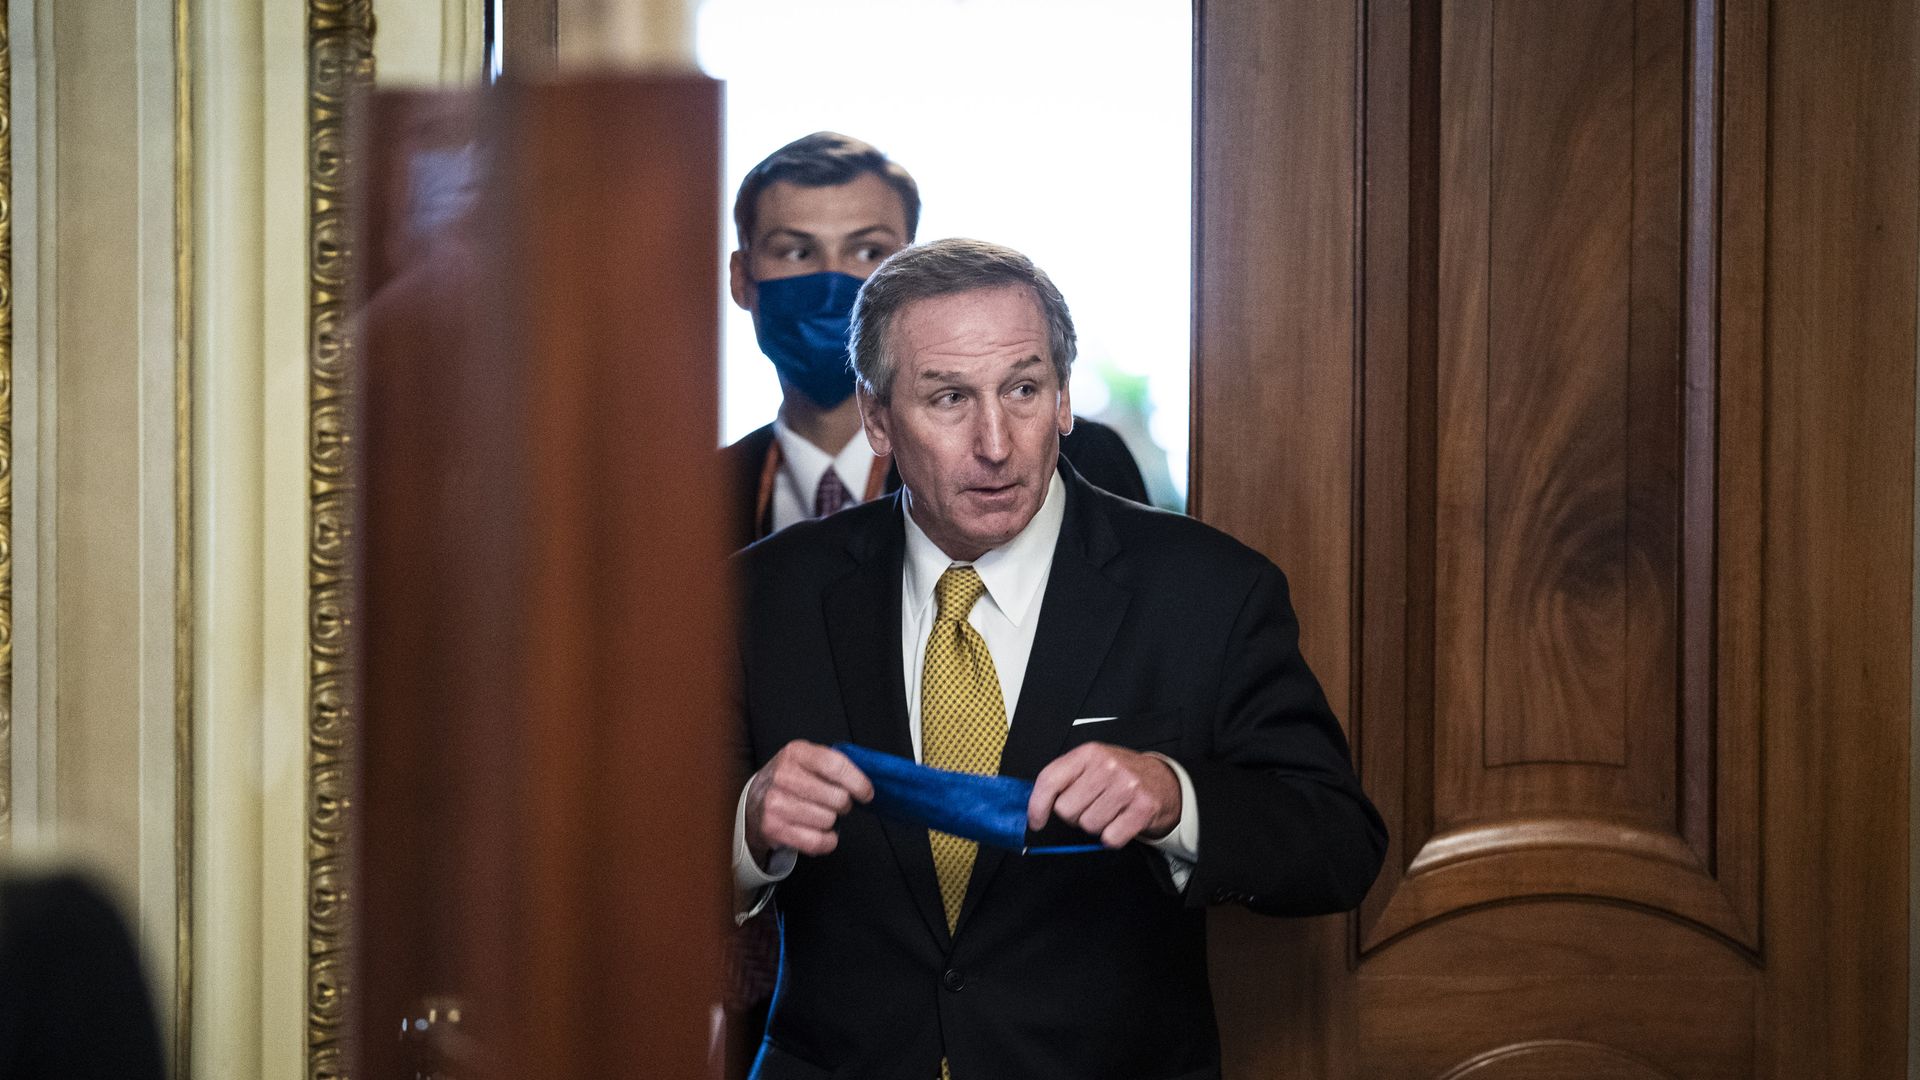 Lawyer Michael van der Veen walks through a Senate doorway with his mask in his hands and a masked man behind him.